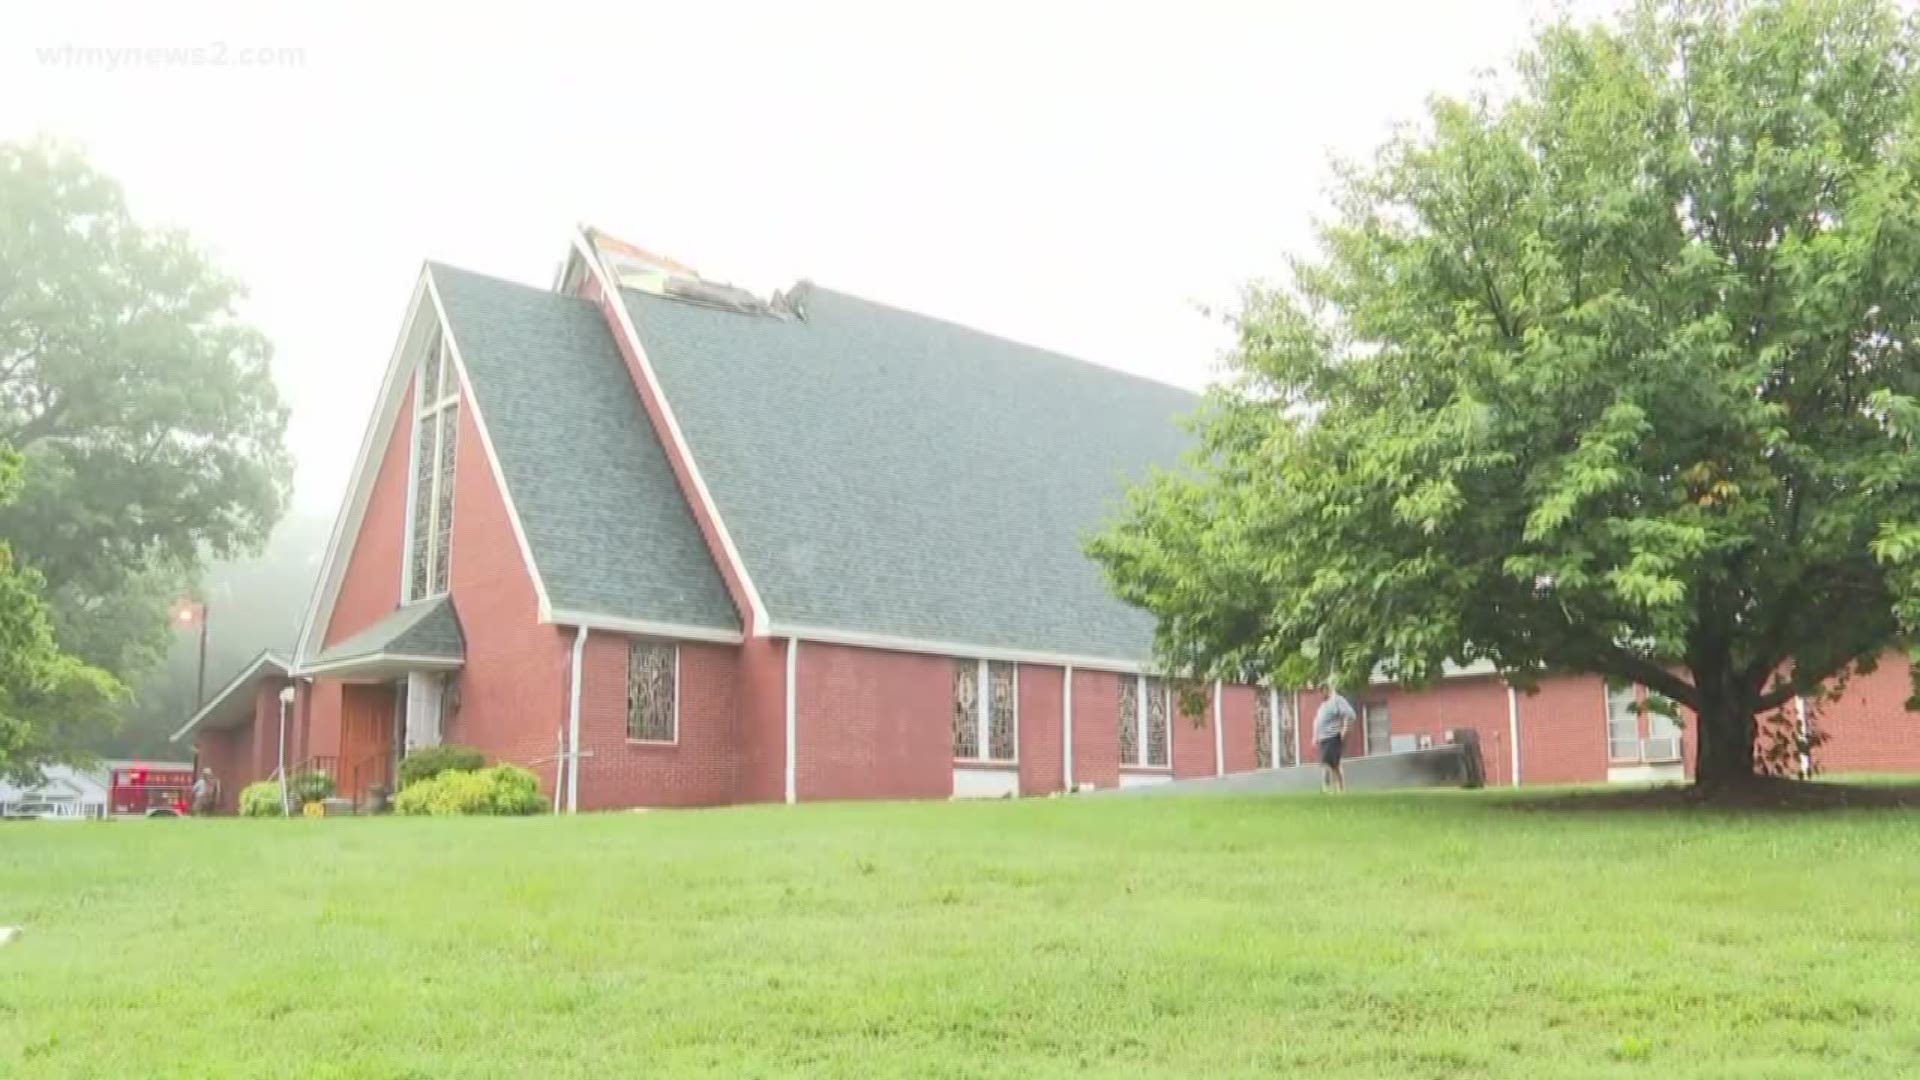 Davie County Communications says a fire at United Methodist Church possibly stemmed from a lightning strike. The steeple was damaged significantly.